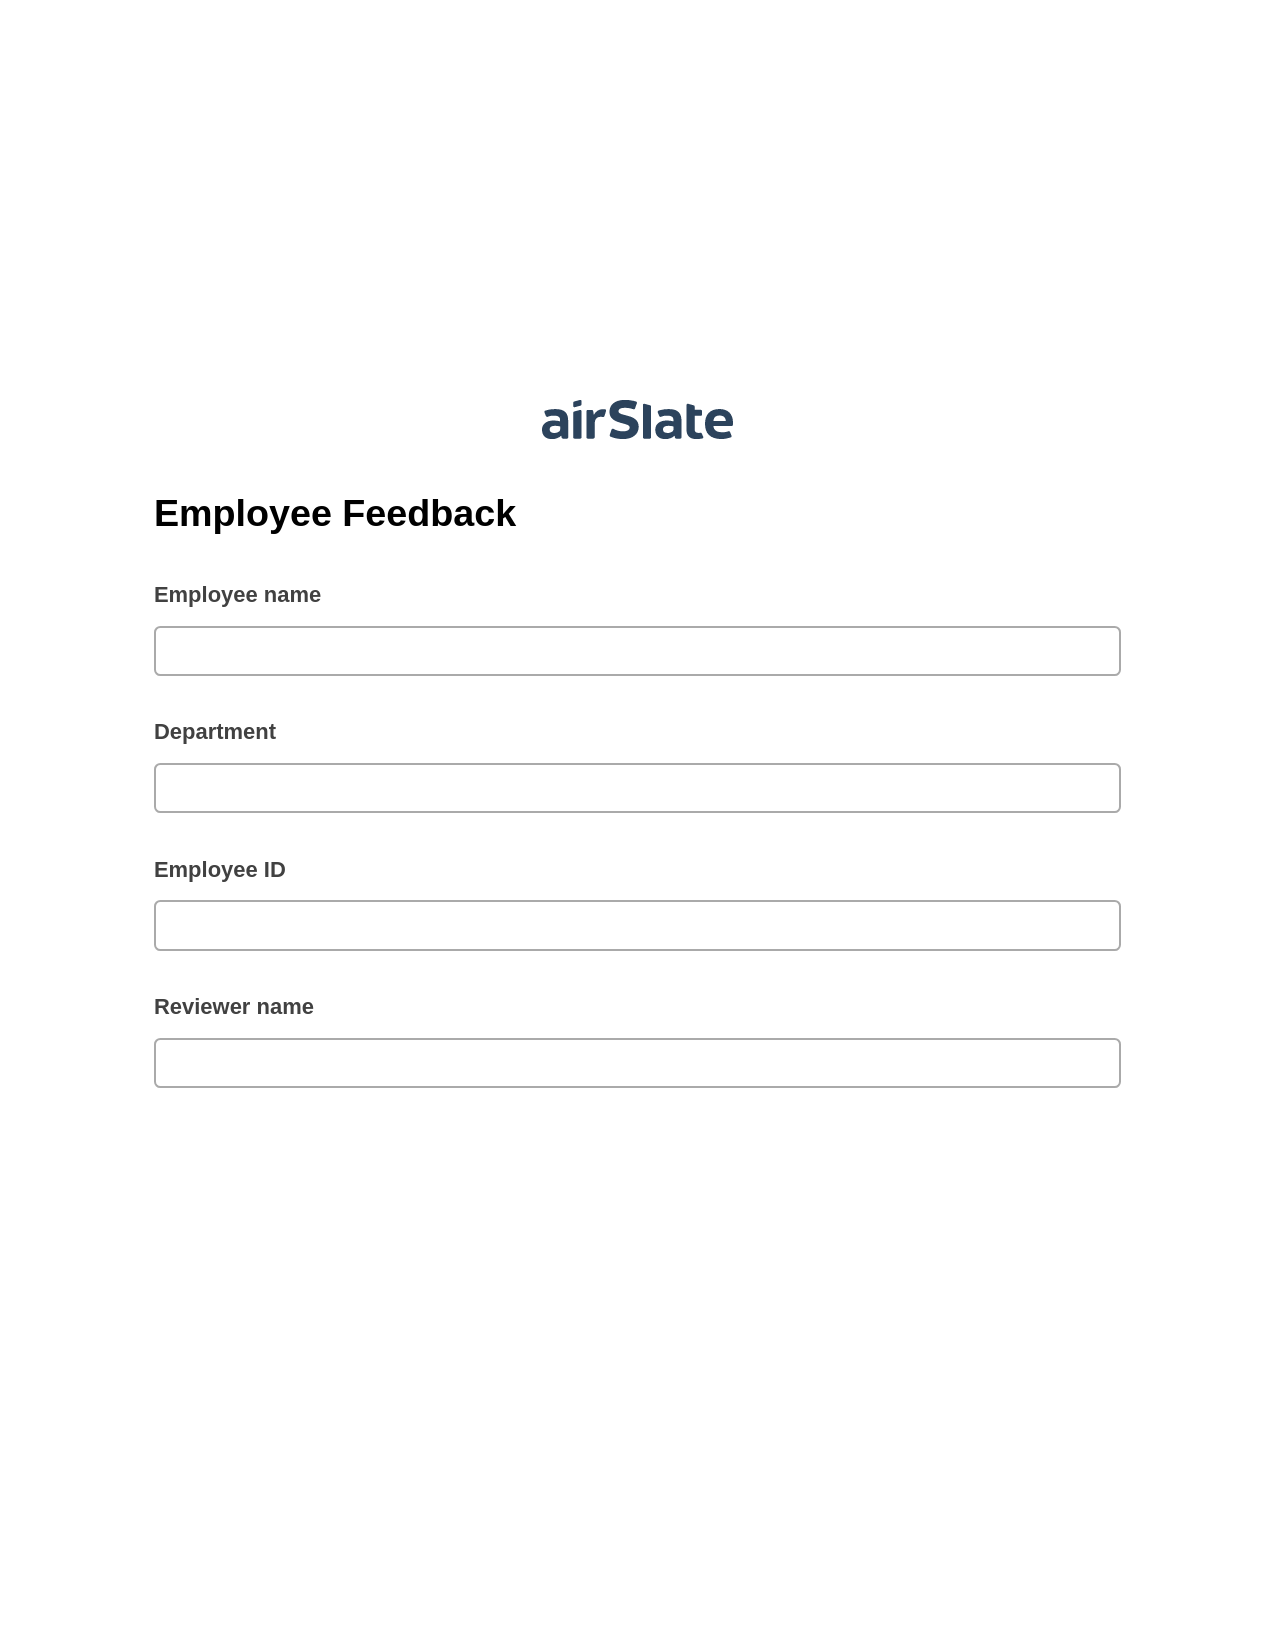 Multirole Employee Feedback Pre-fill from Salesforce Record Bot, Unassign Role Bot, OneDrive Bot